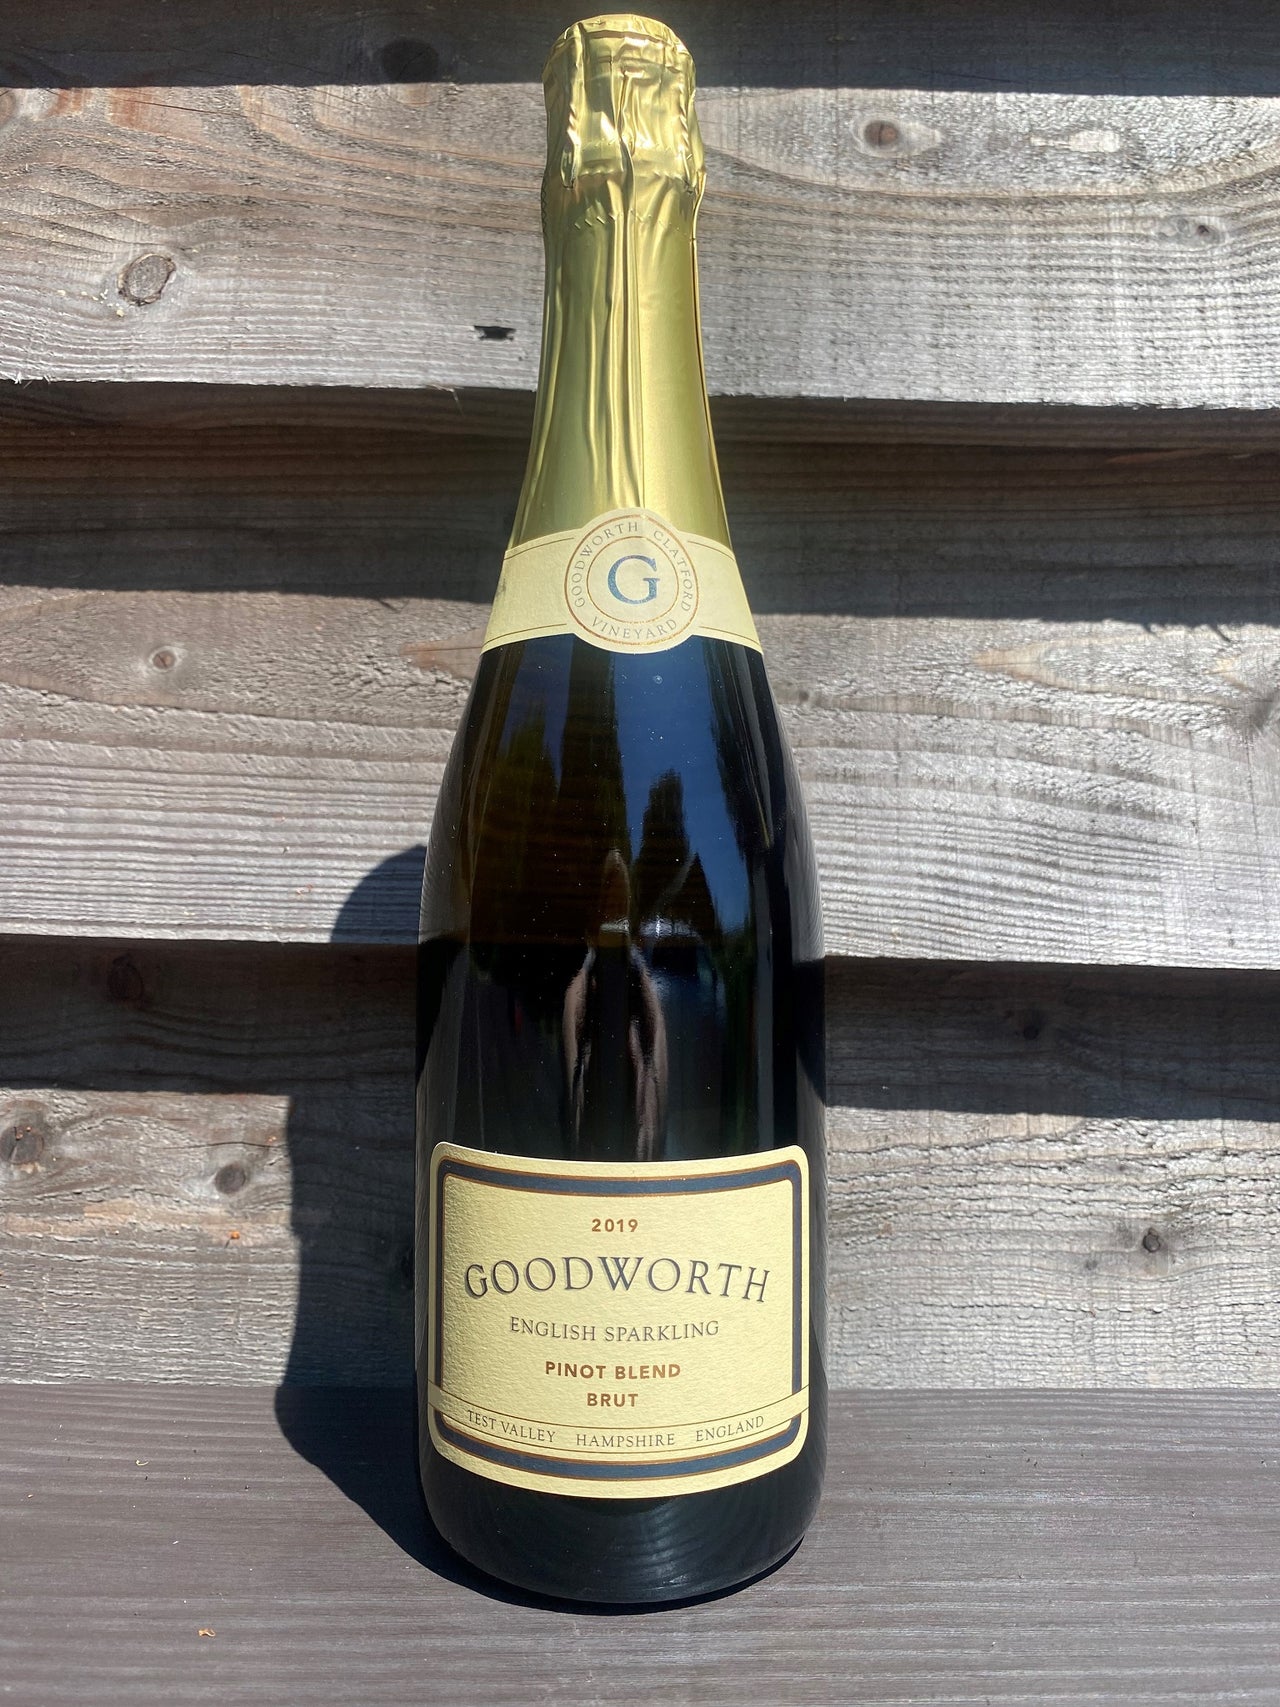 Goodworth English Sparkling Wine 2019 Pinot Blend 75cl 12%